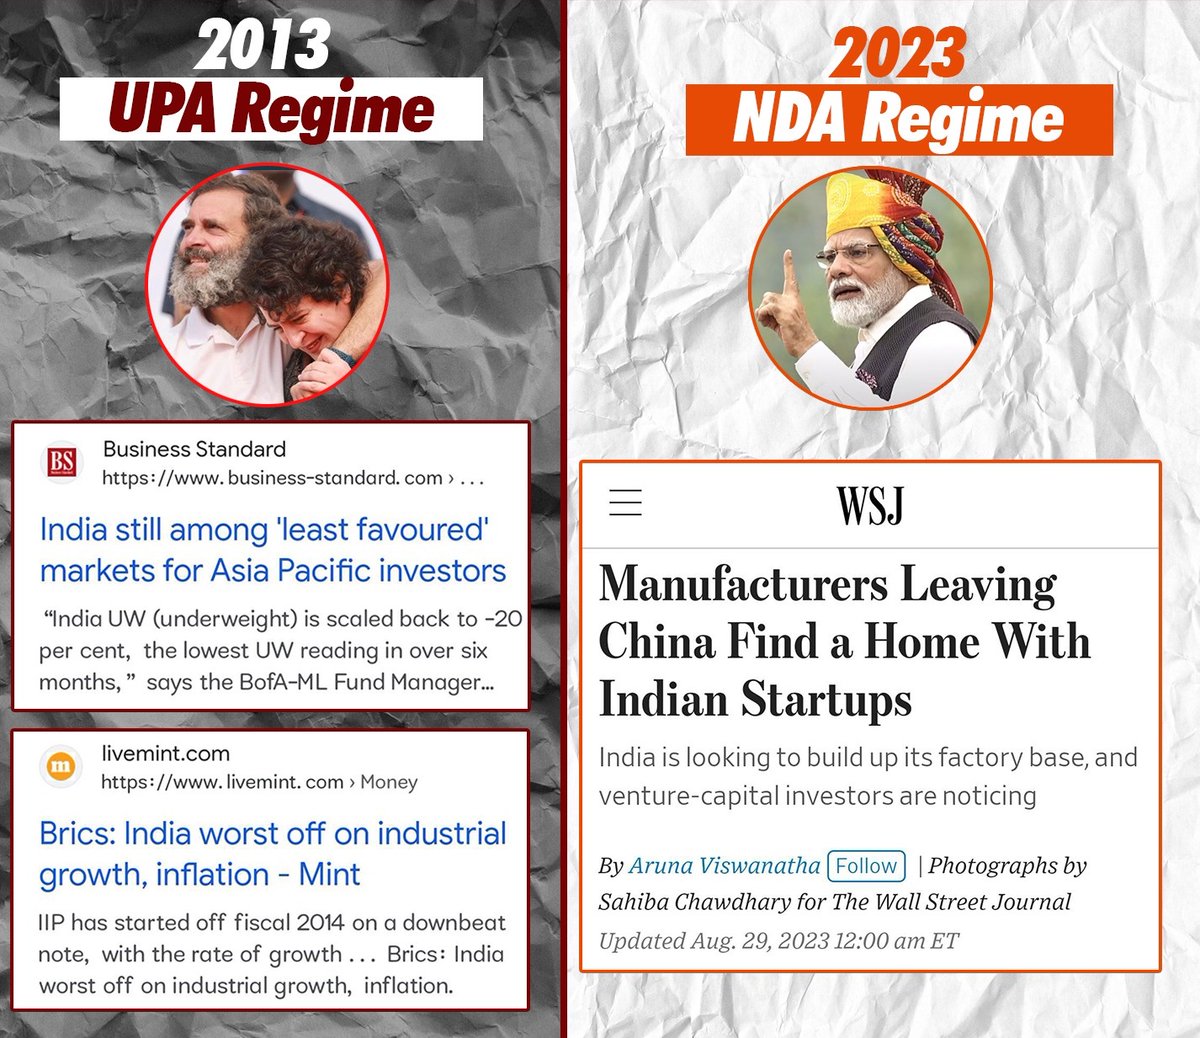 India worst off on industrial growth under the UPA versus India becoming an attractive destination for investors under the NDA! फर्क साफ है!